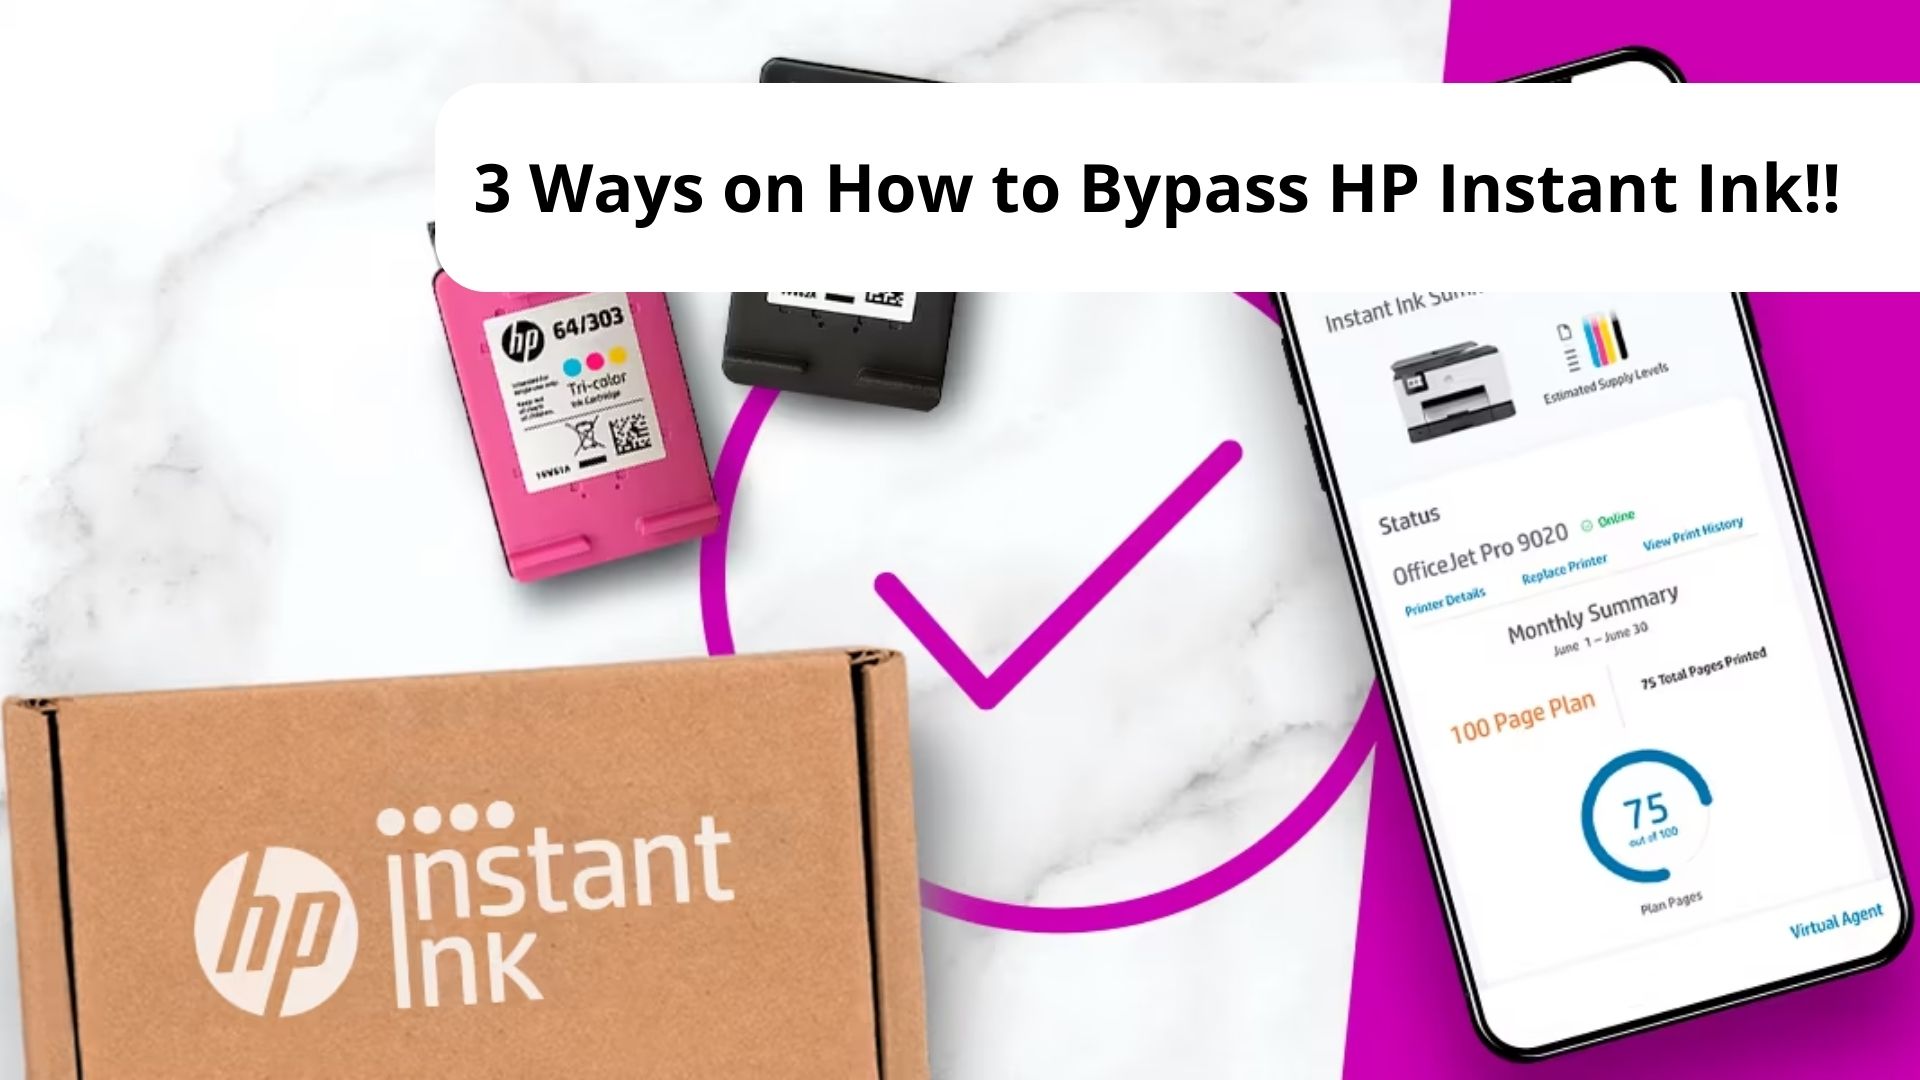 How to Bypass HP Instant Ink